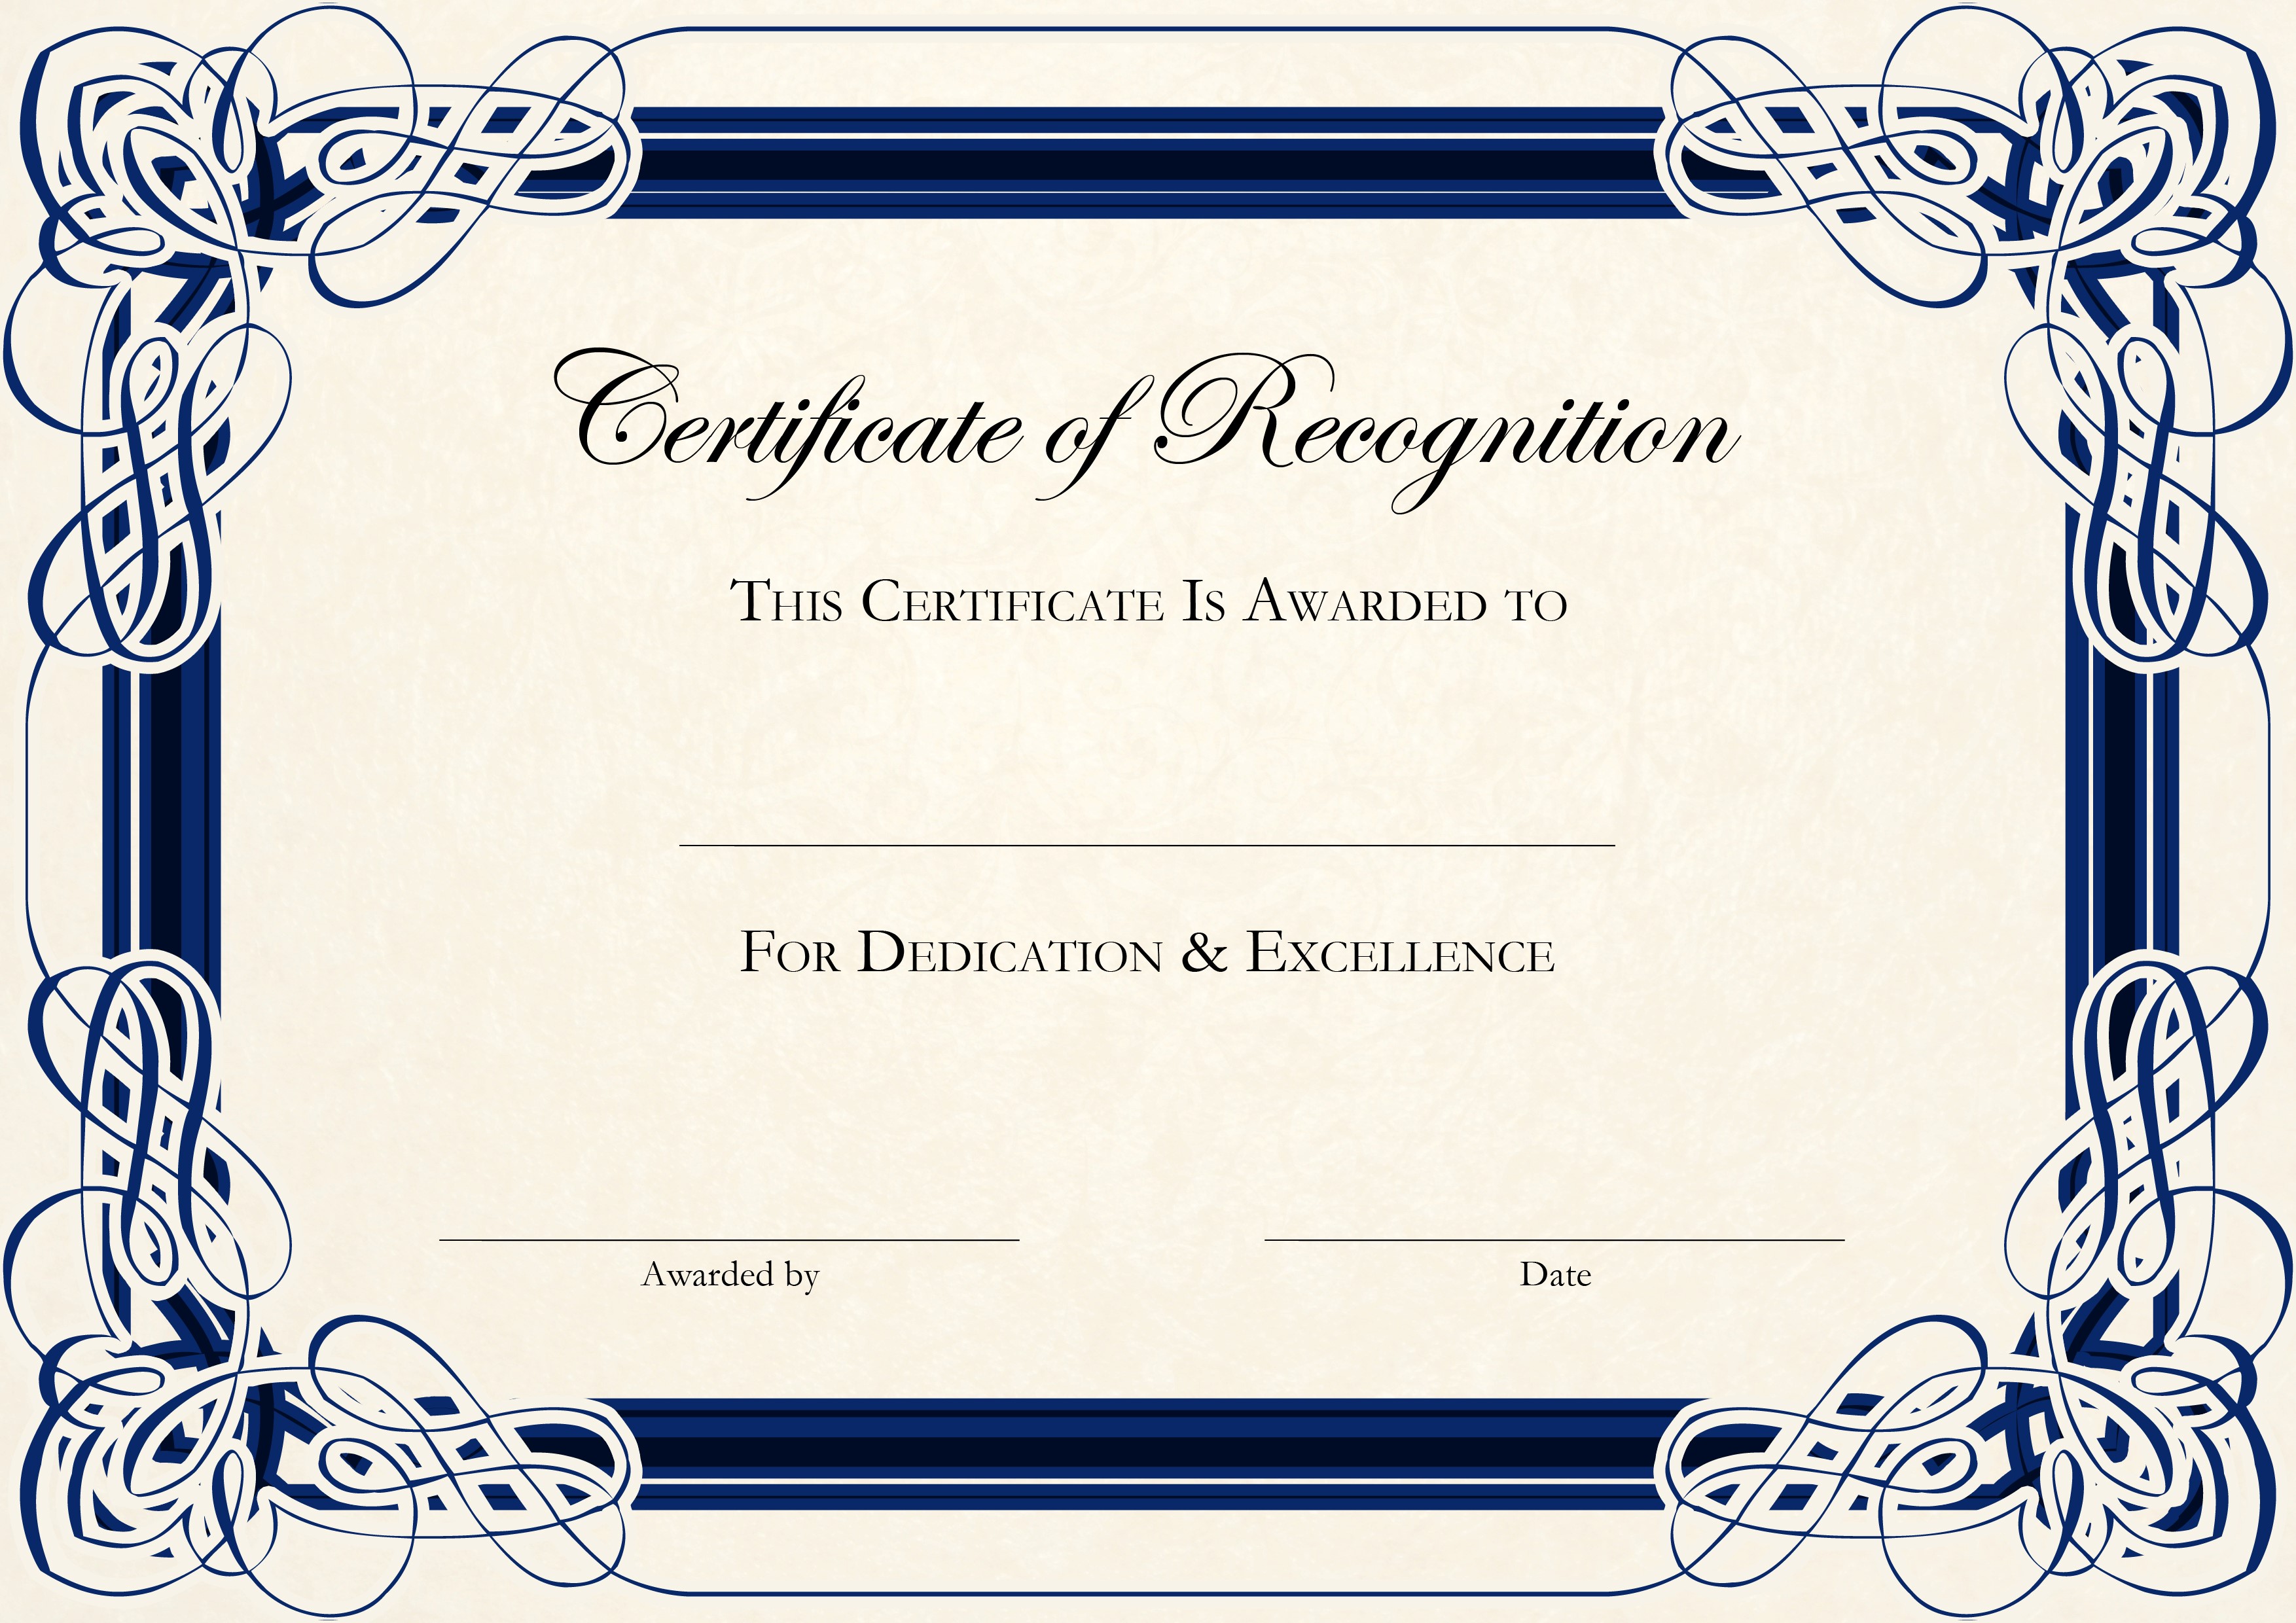 certificate template for microsoft word pics photos certificate 